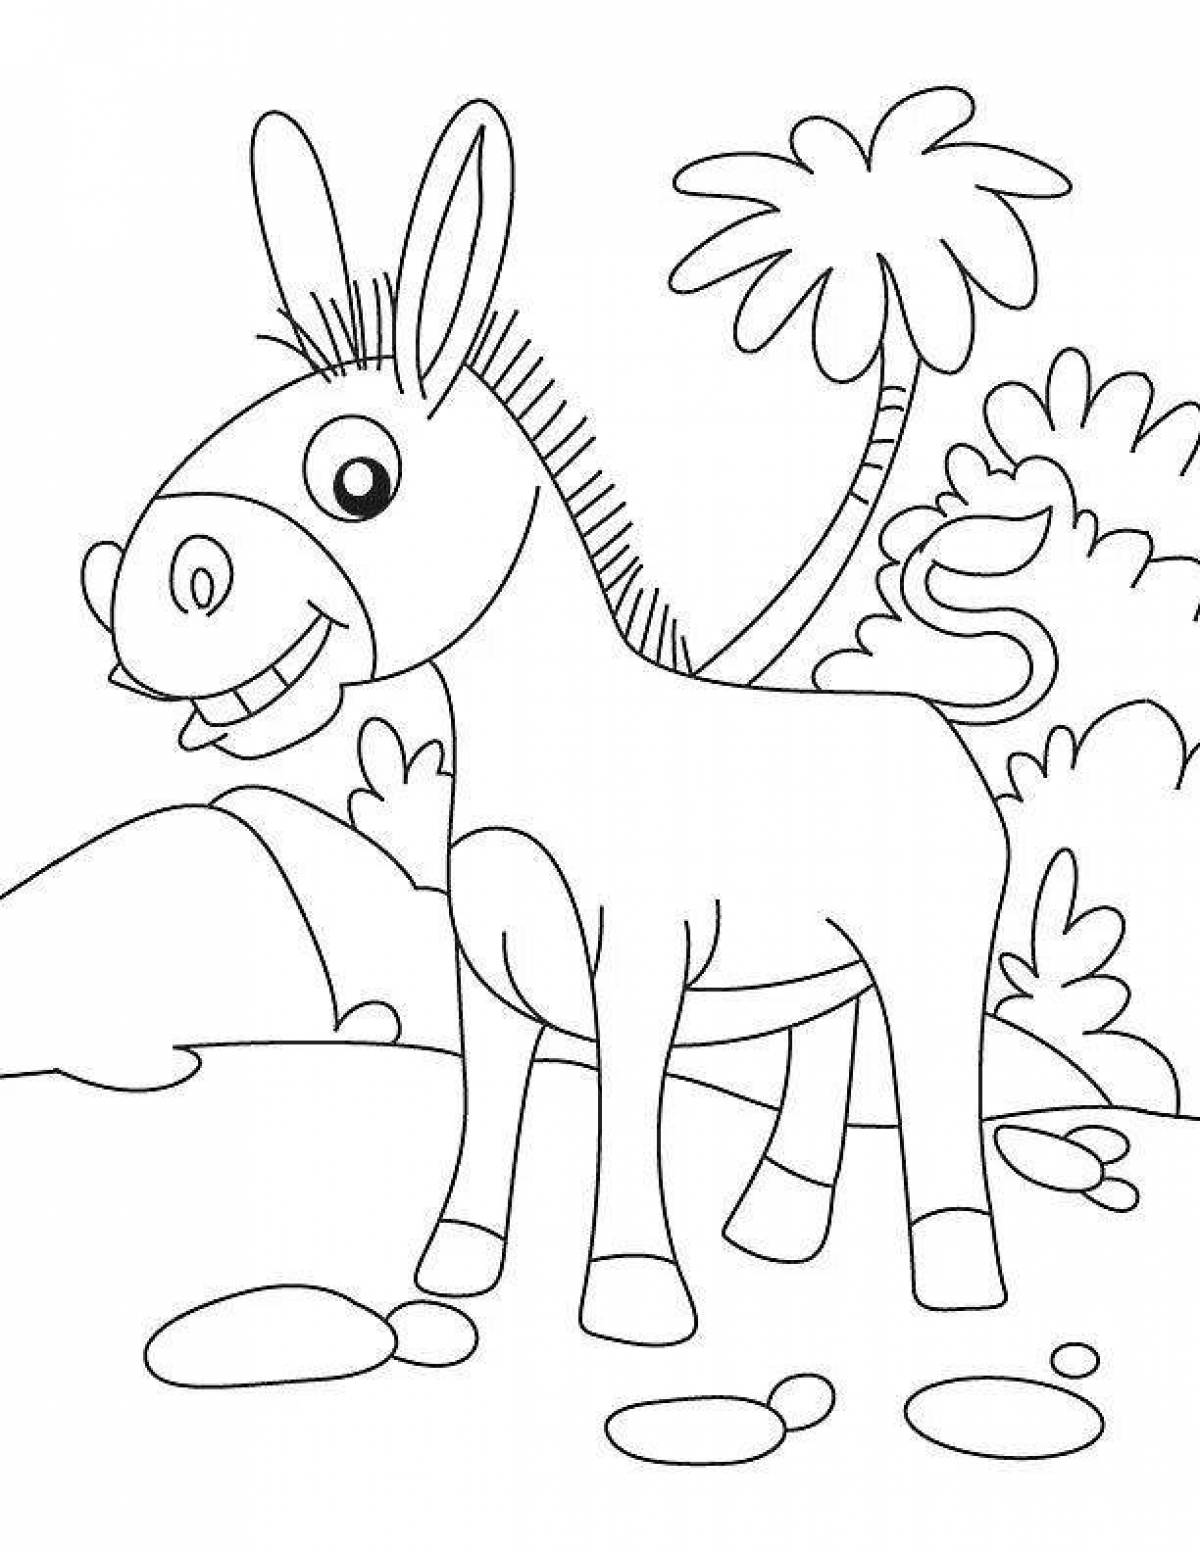 Happy coloring page donkey for kids